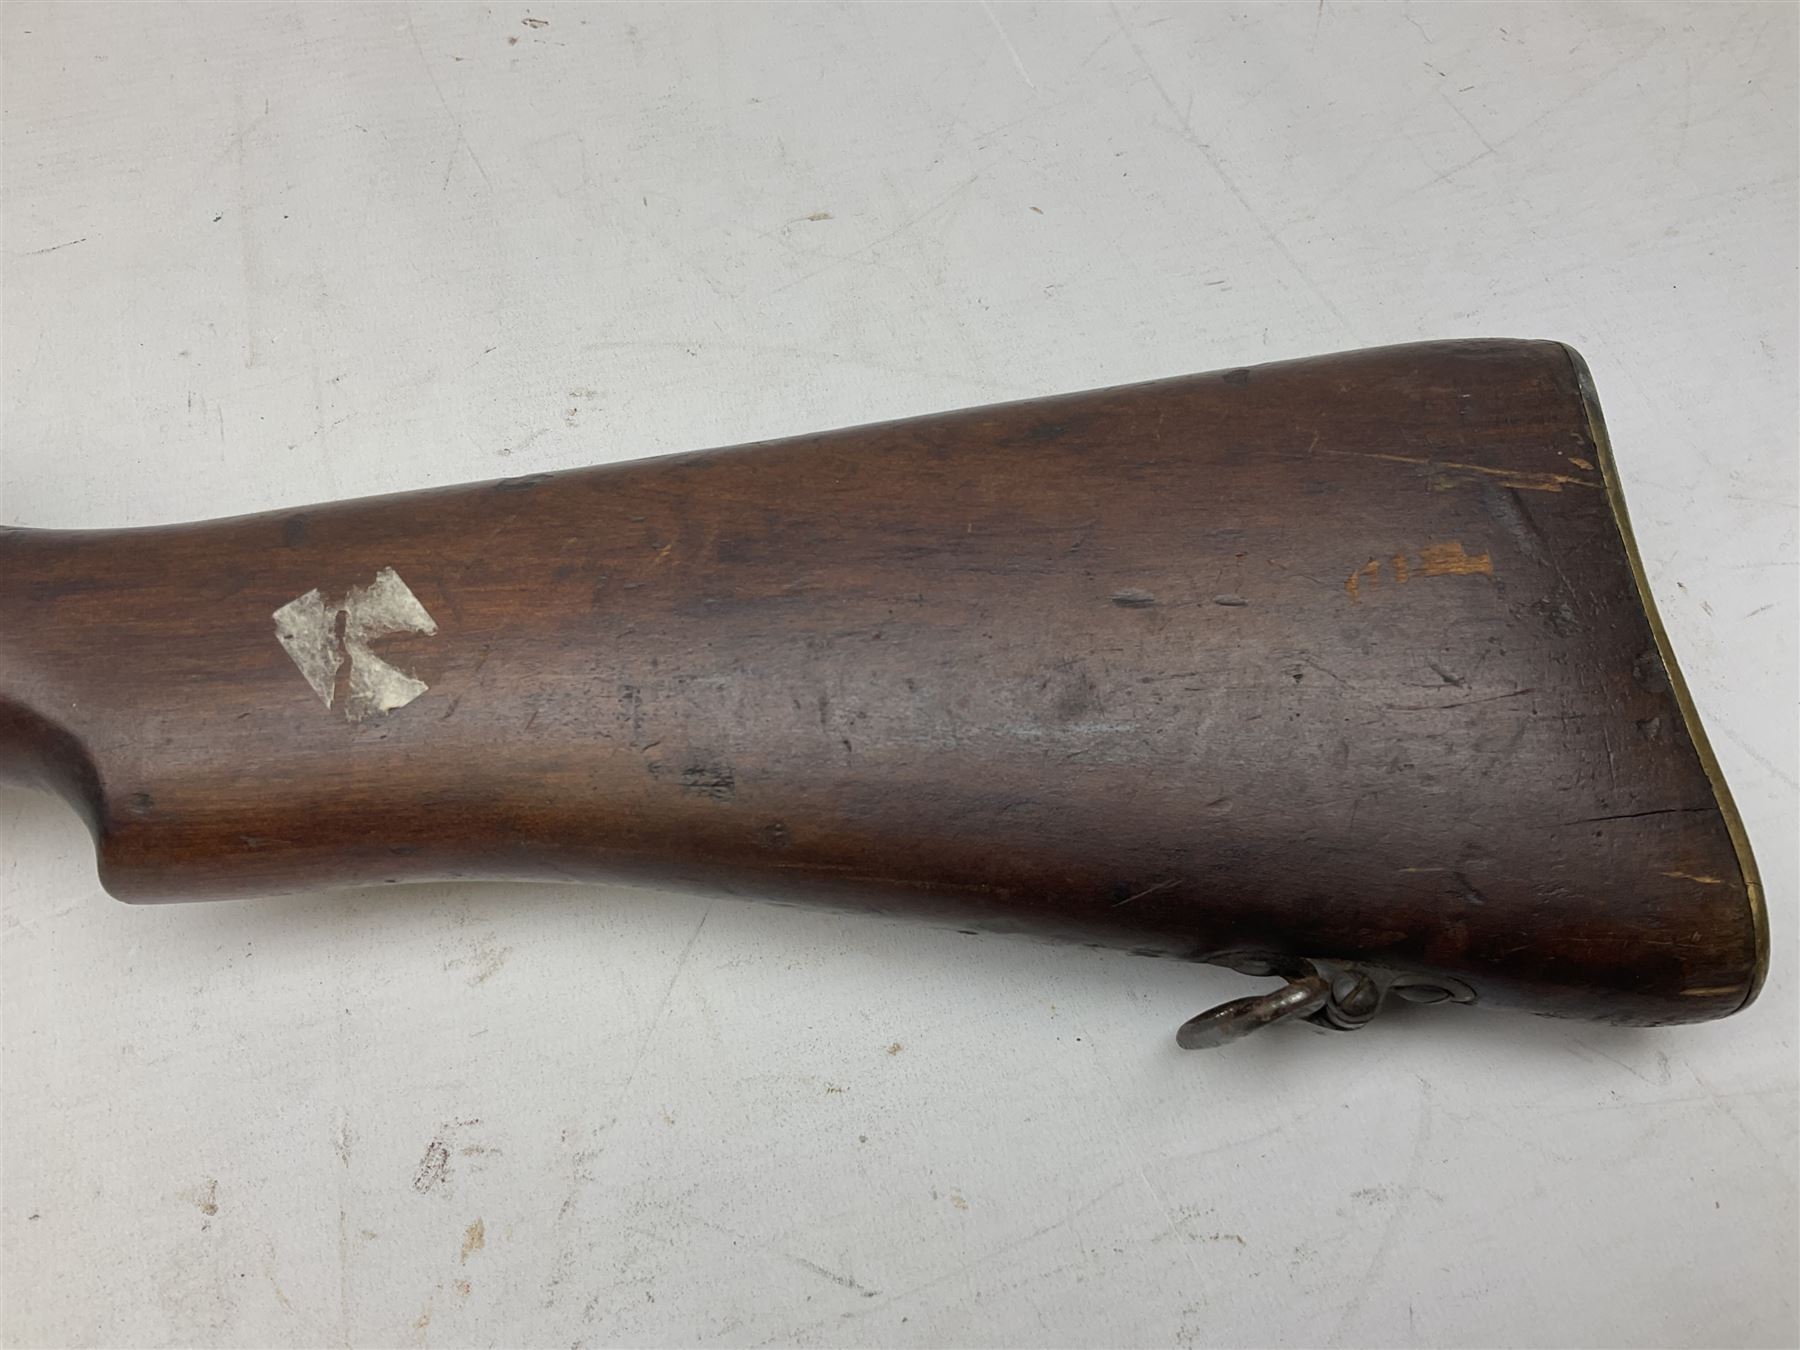 WW1 Lee Enfield SMLE bolt-action rifle - Image 16 of 24